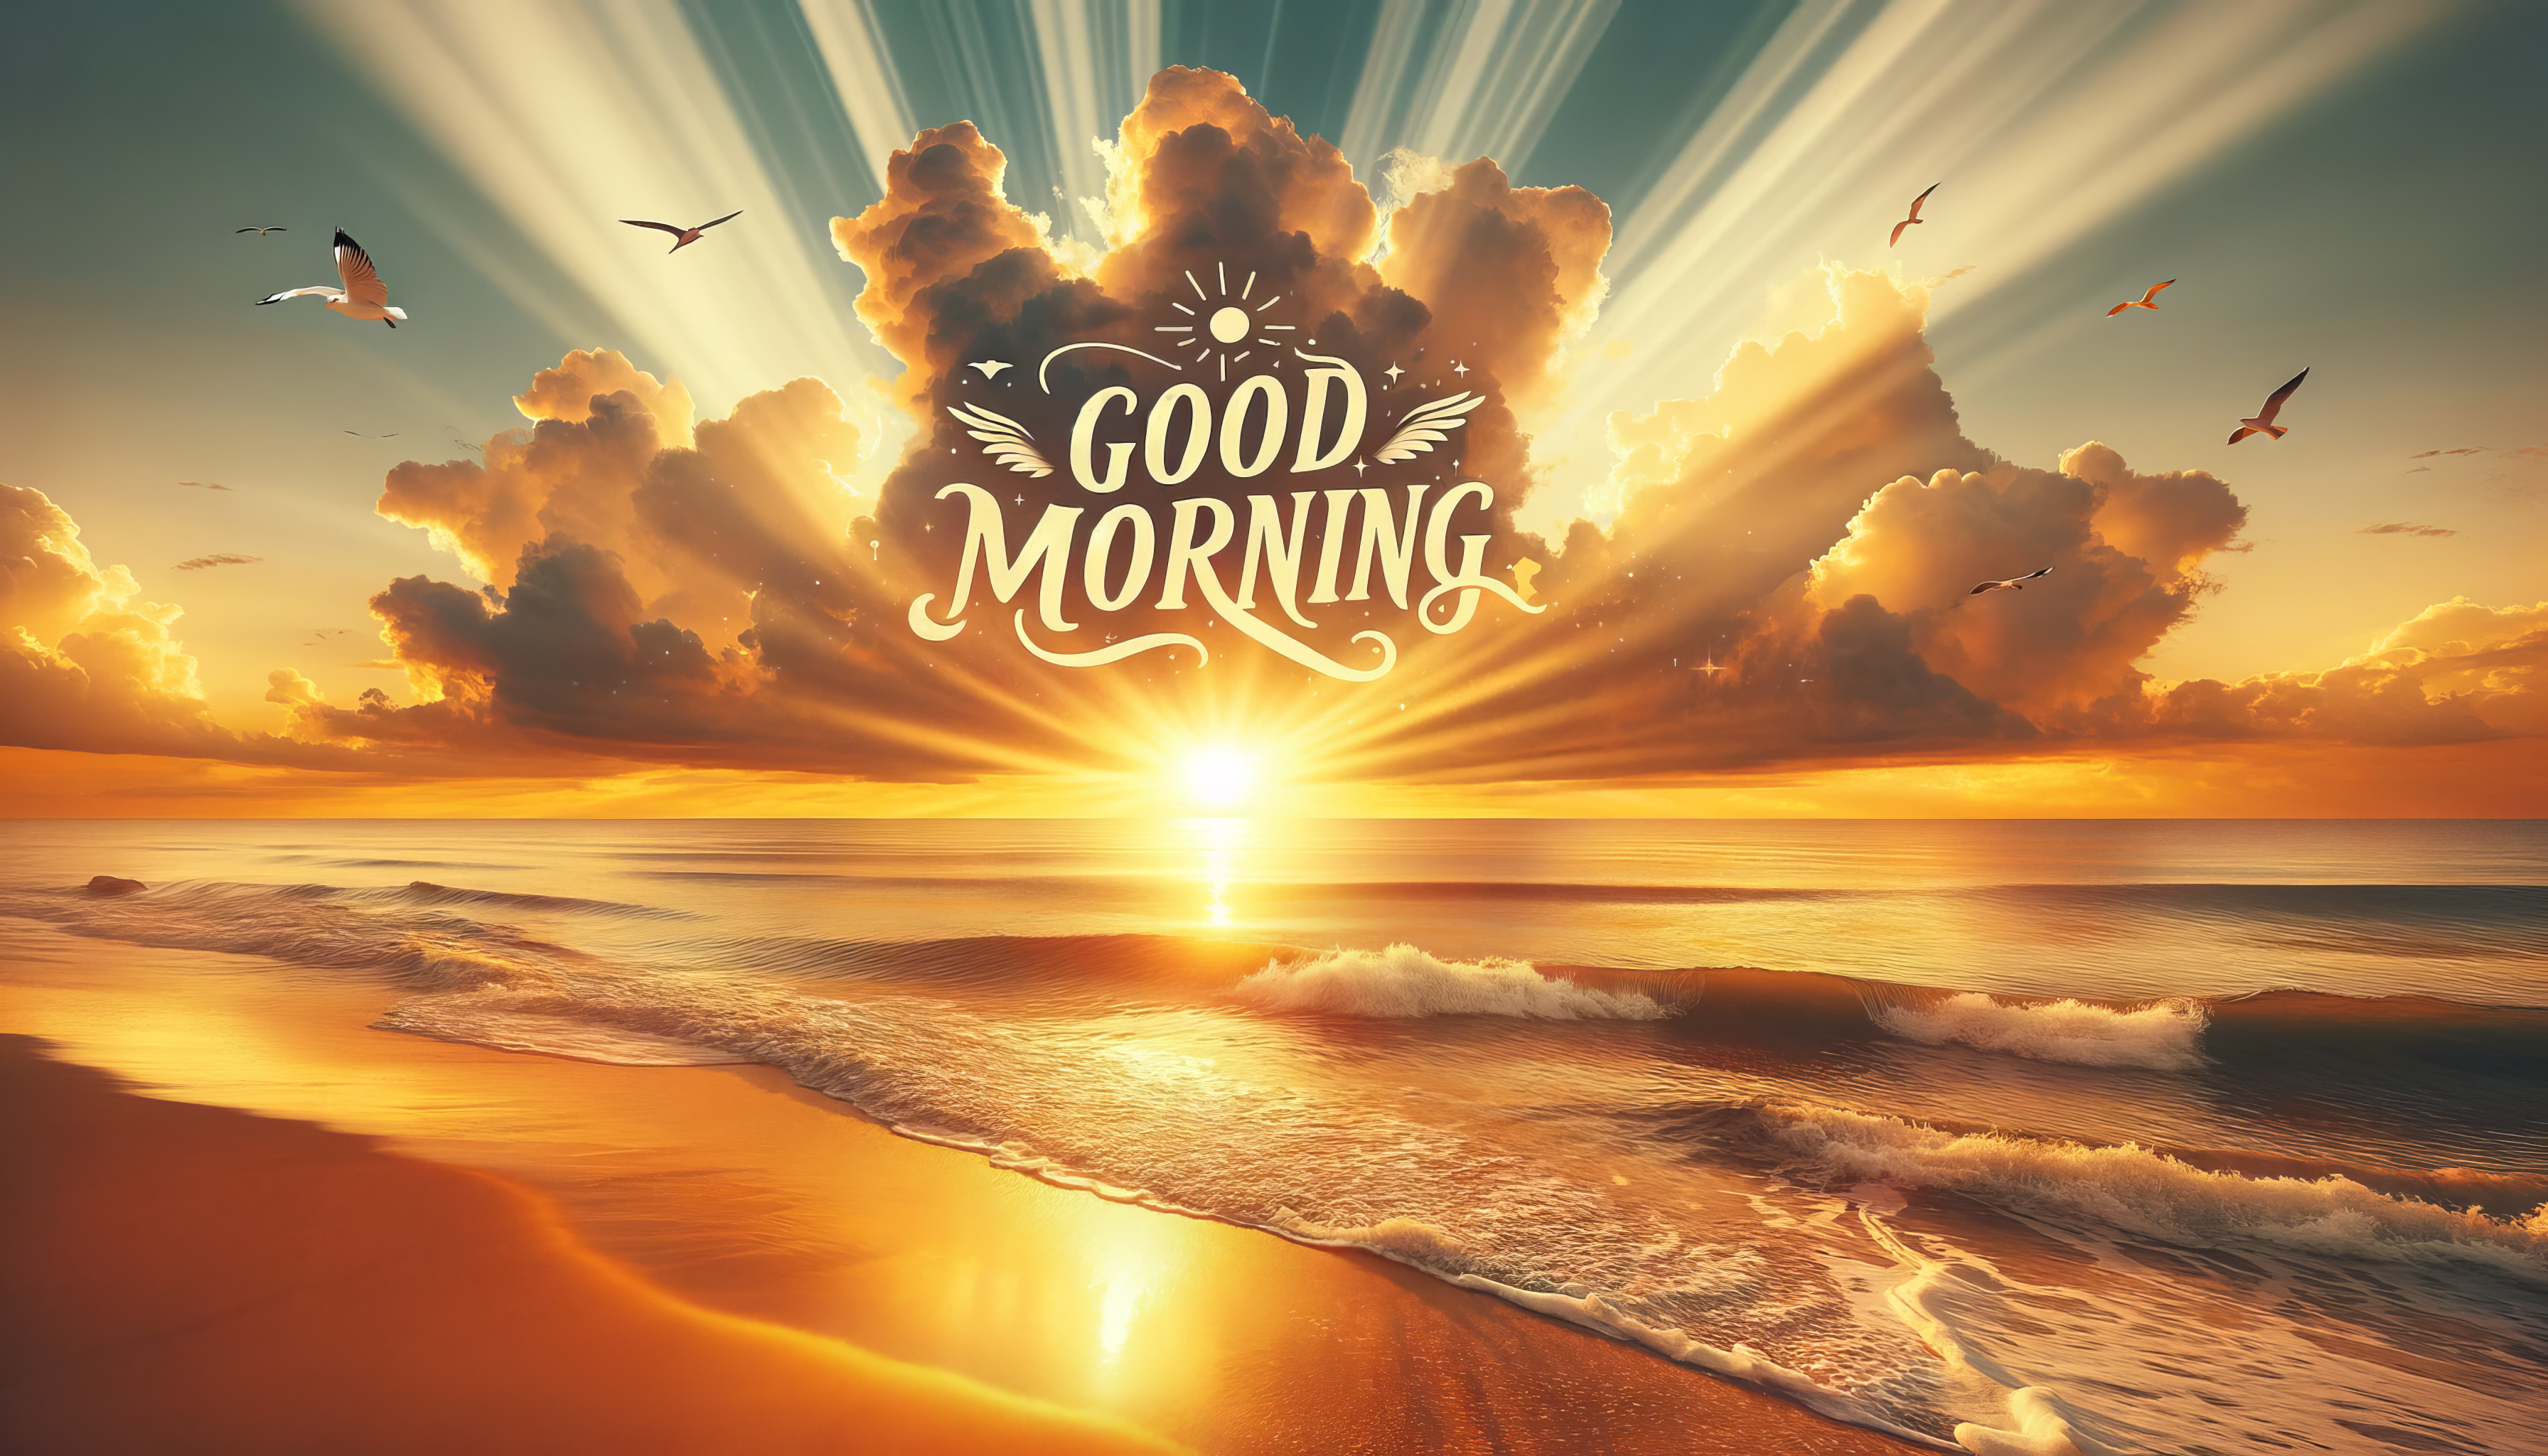 Good Morning text with sunny beach sunrise and flying birds, ideal for HD desktop wallpaper.